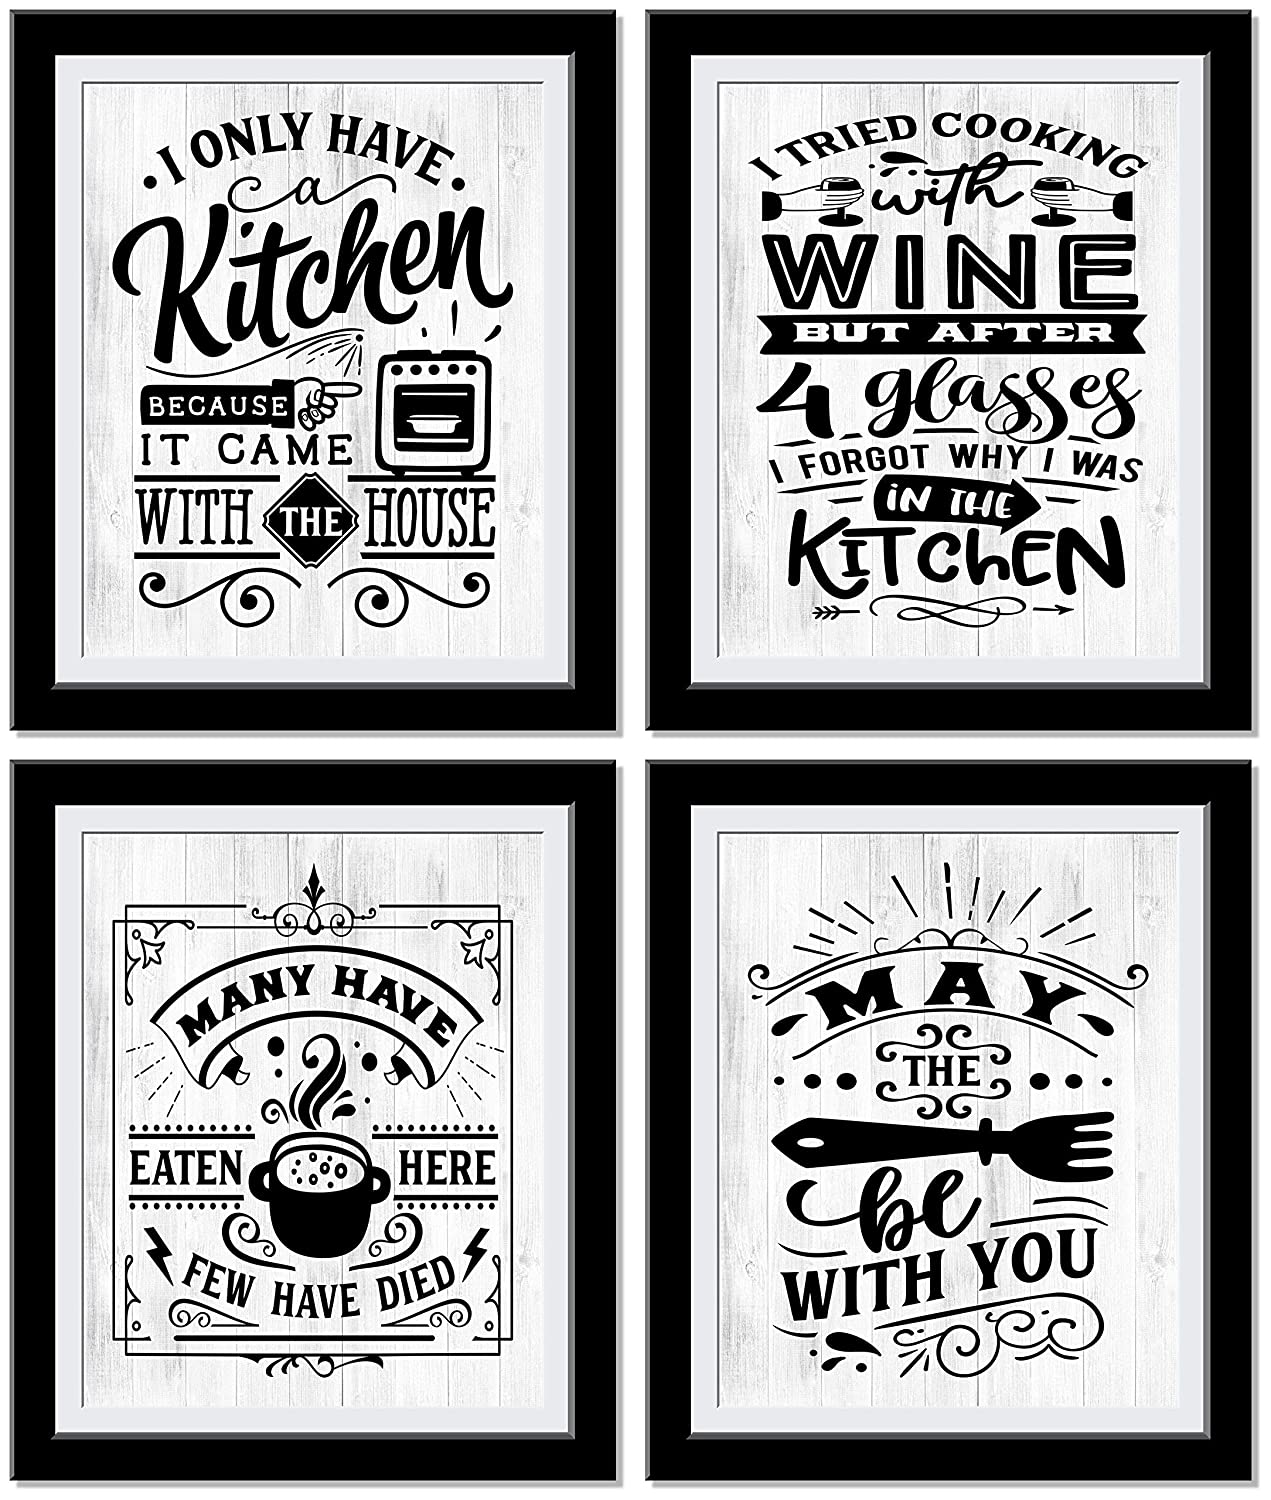 Many Have Eaten Here Few Died Funny Kitchen Signs, Kitchen Wall Decor, Cute  Typography Fun And Full Of Character Kitchen Art Home Decor, Super Funny